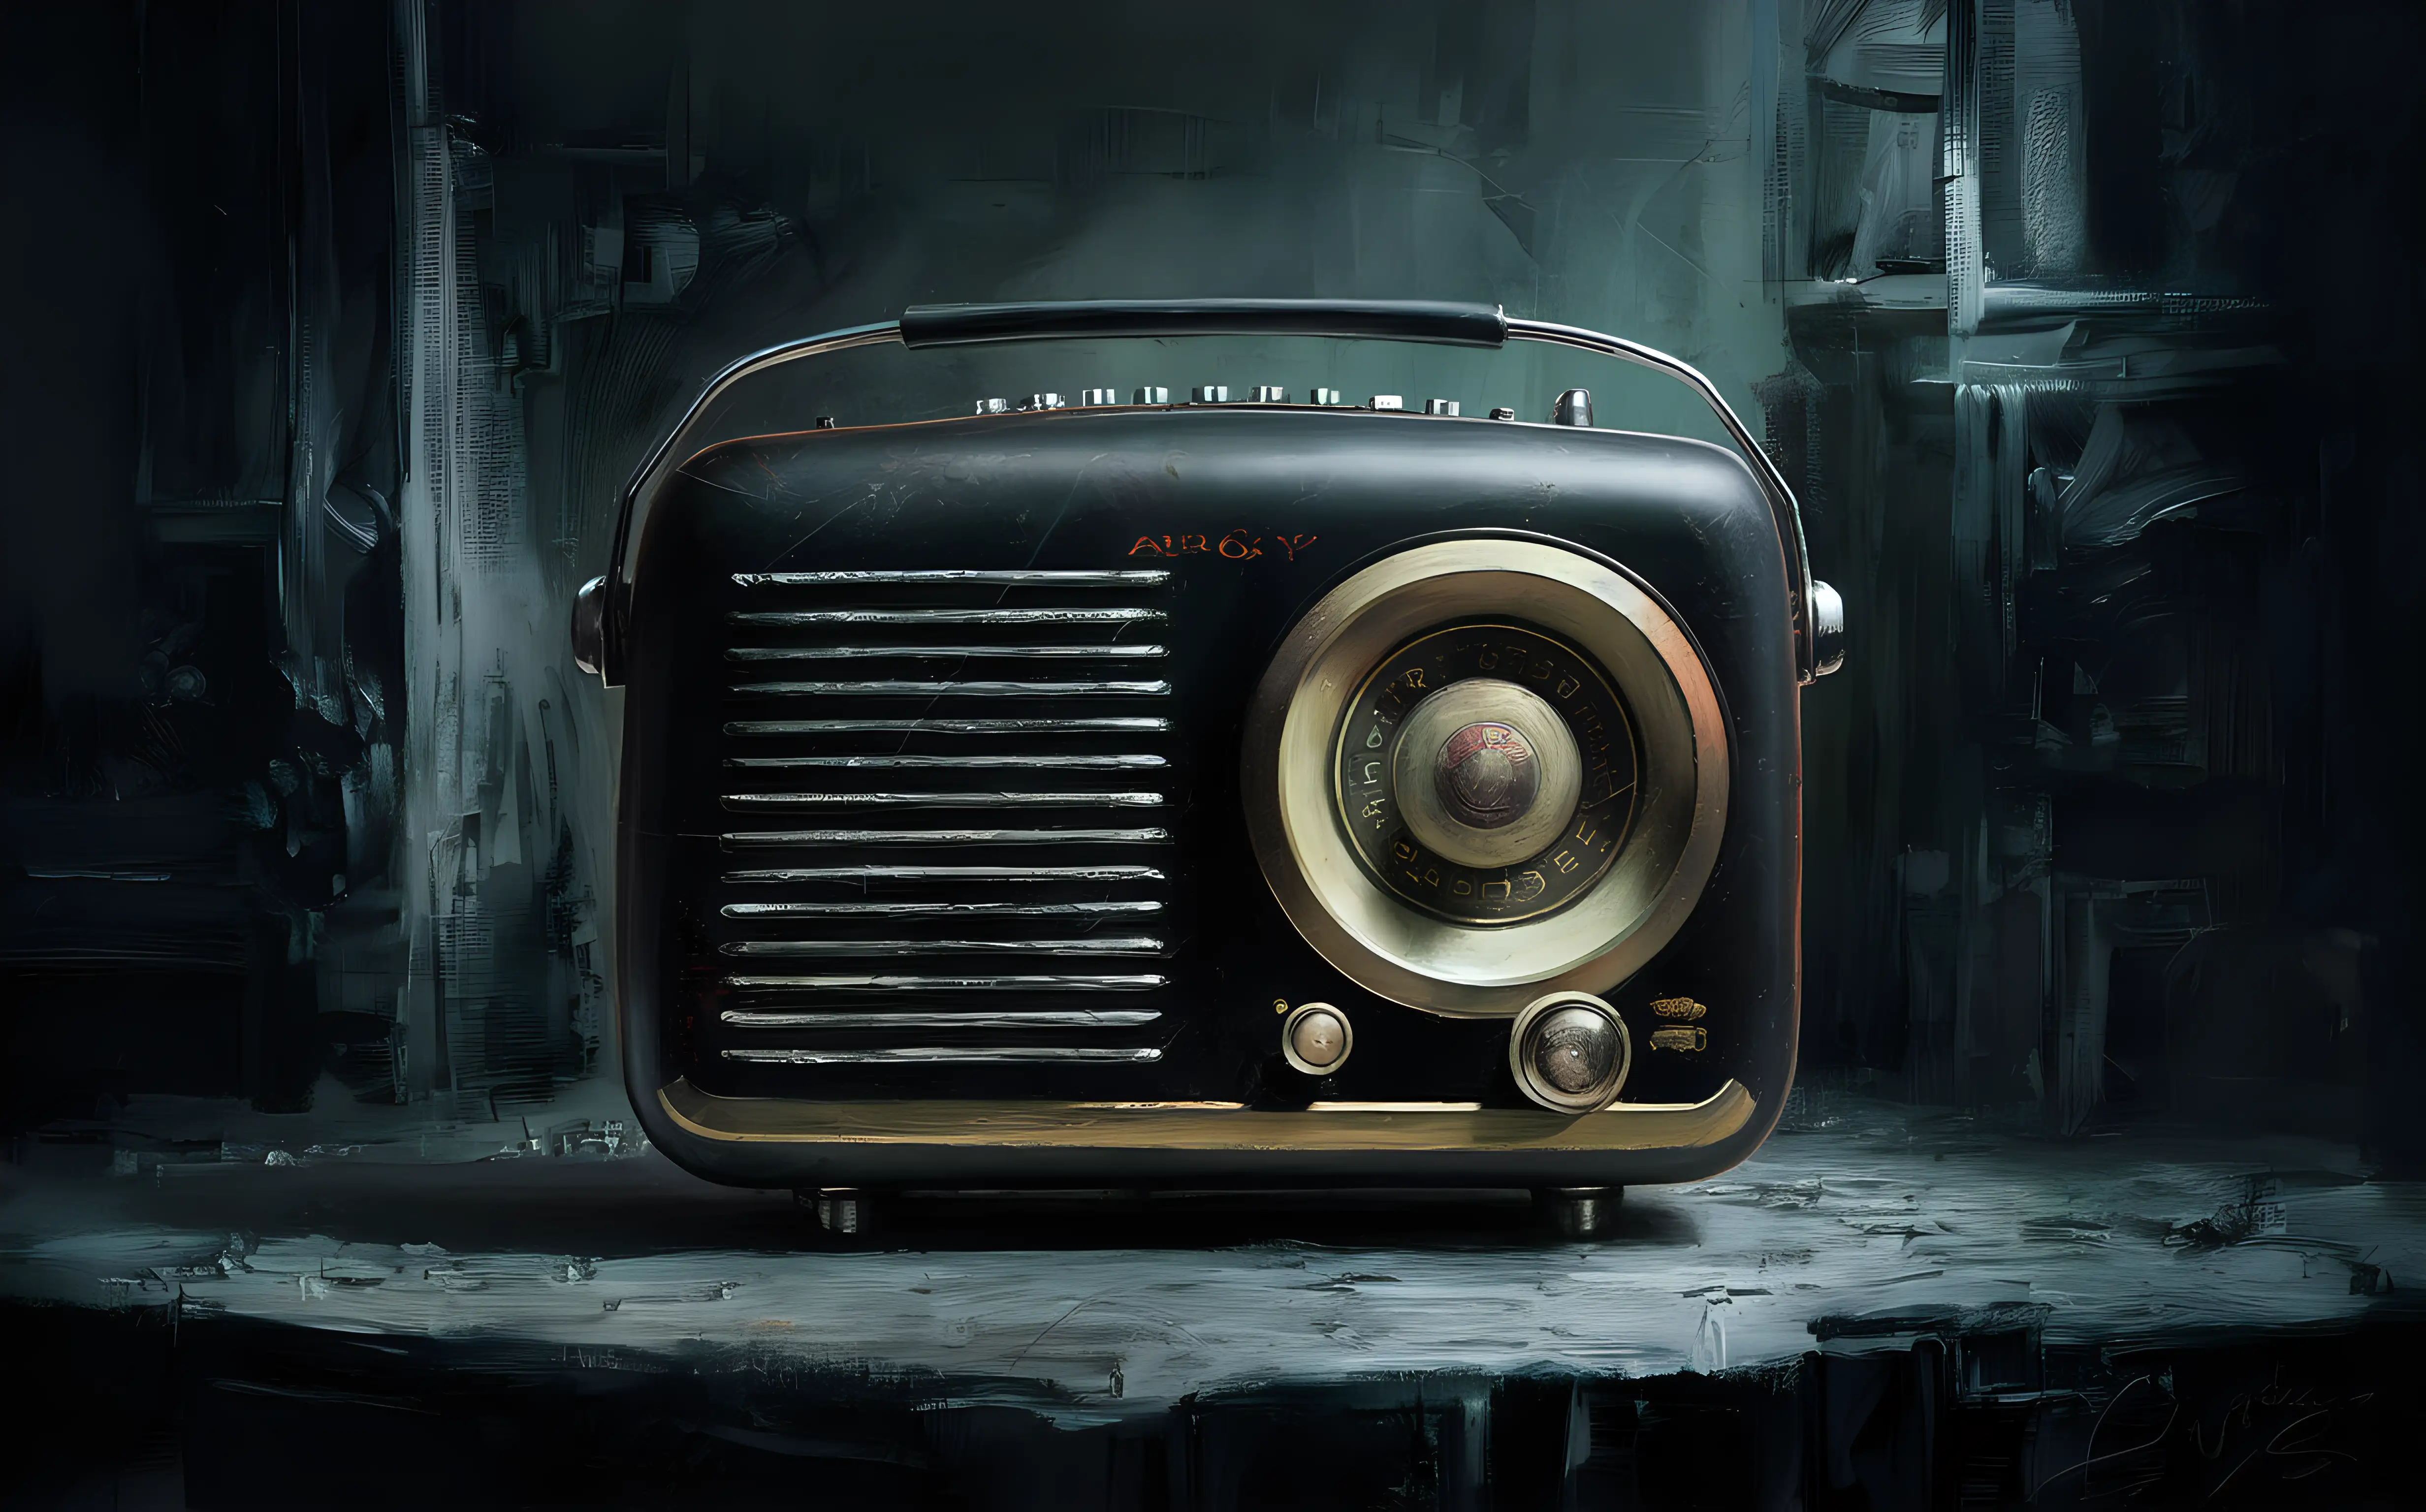 A painting in the style of Arshile Gorky of an old time radio against a dark background.